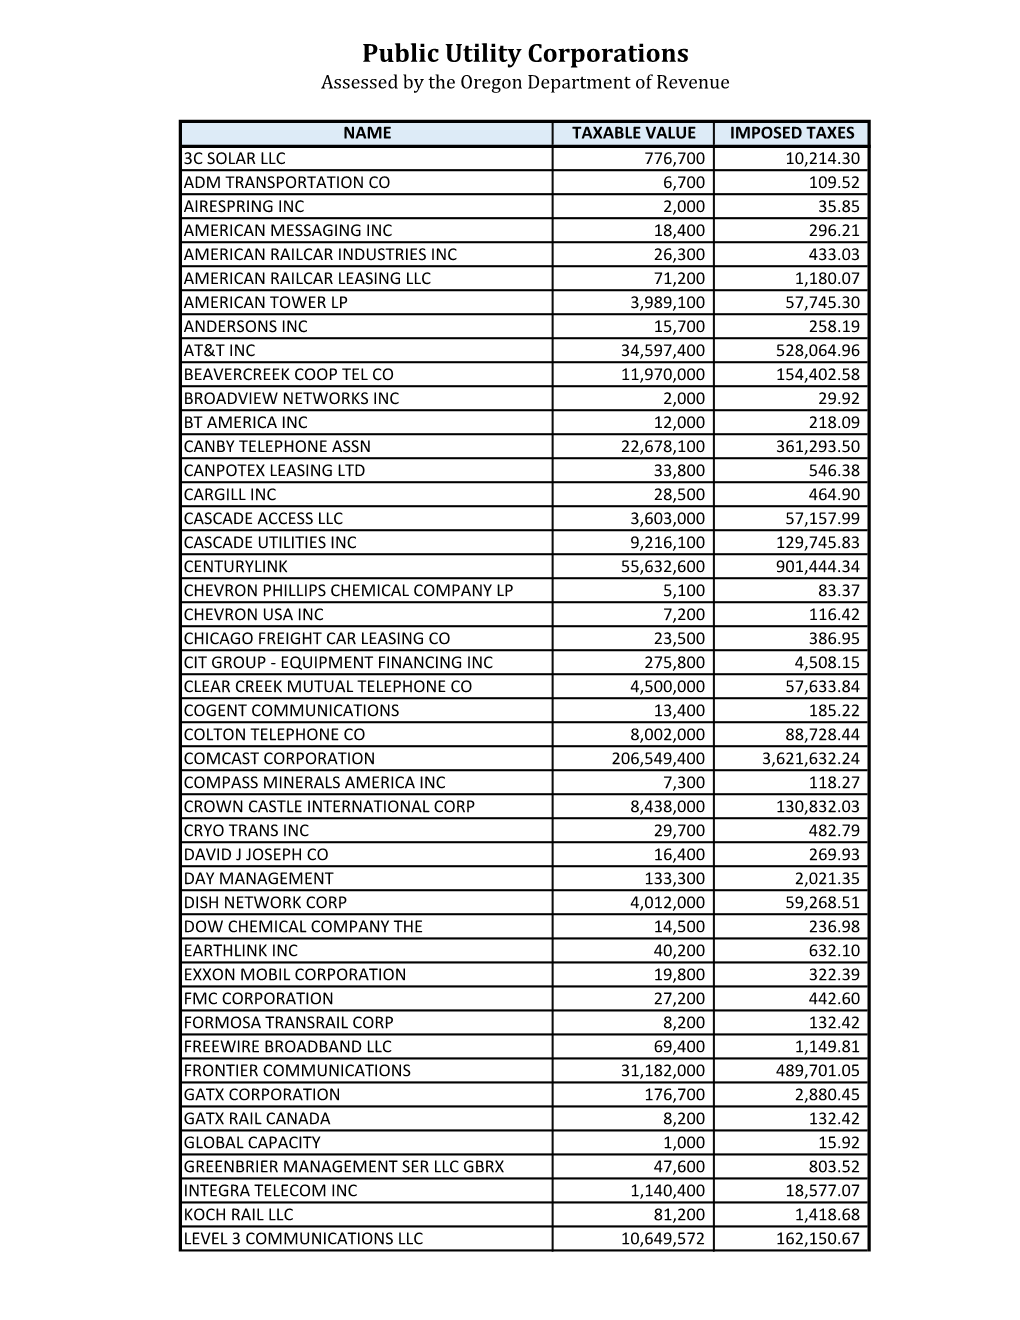 Public Utility Corporations Assessed by the Oregon Department of Revenue